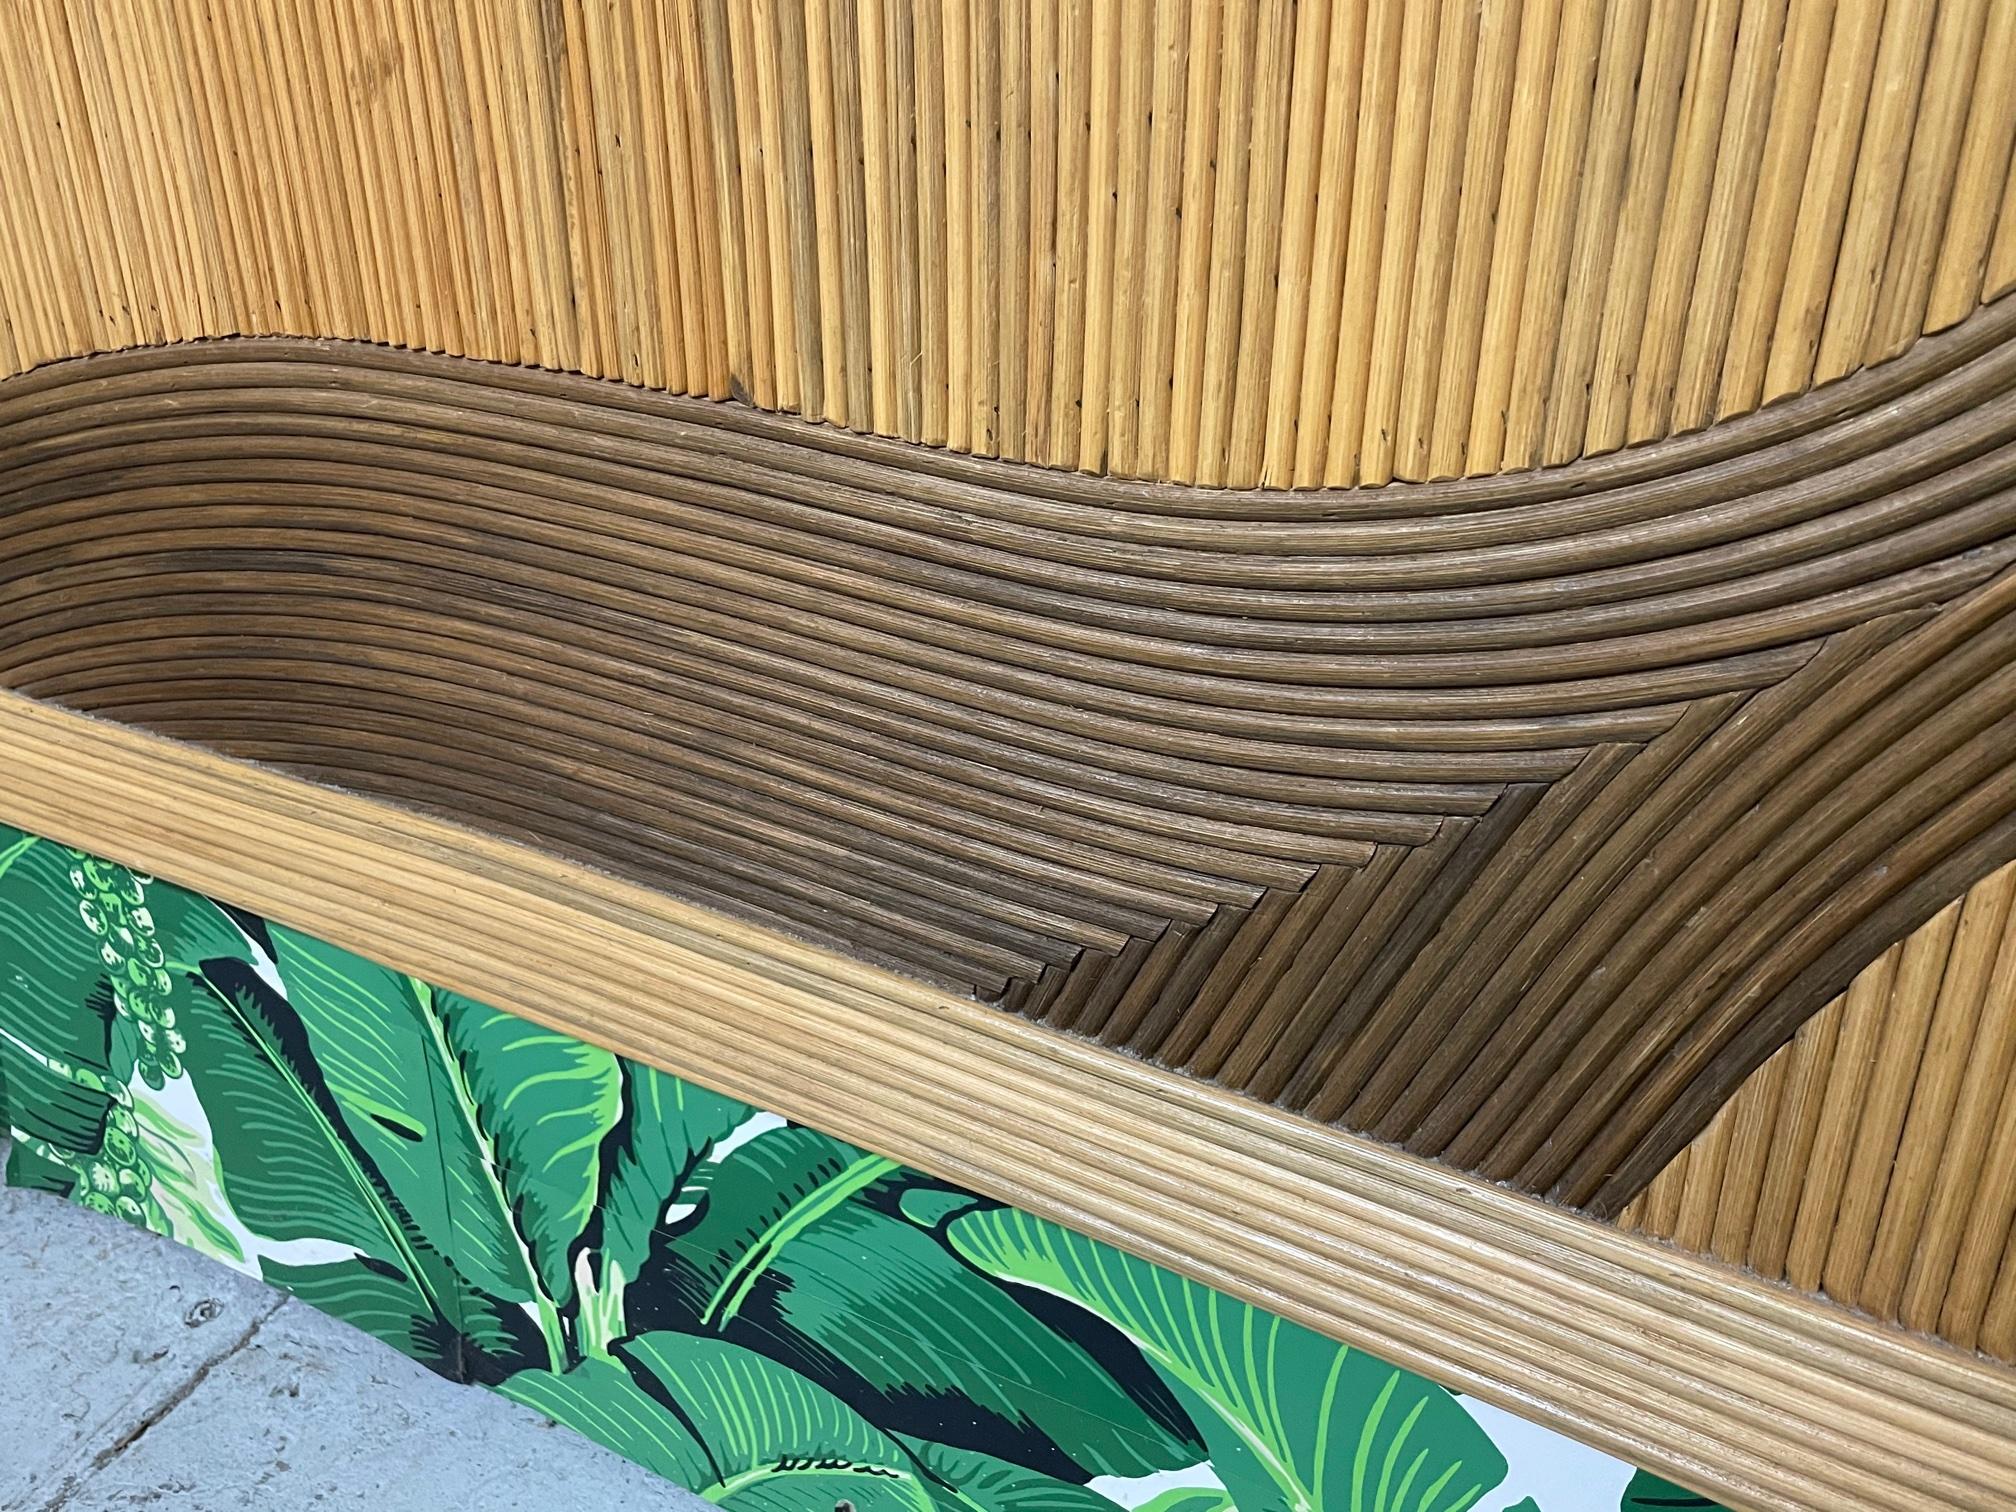 Queen size rattan bed headboard features full veneer of pencil reed rattan in a decorative pattern. In the style of Betty Cobonpue. Very good condition with only minor imperfections consistent with age.